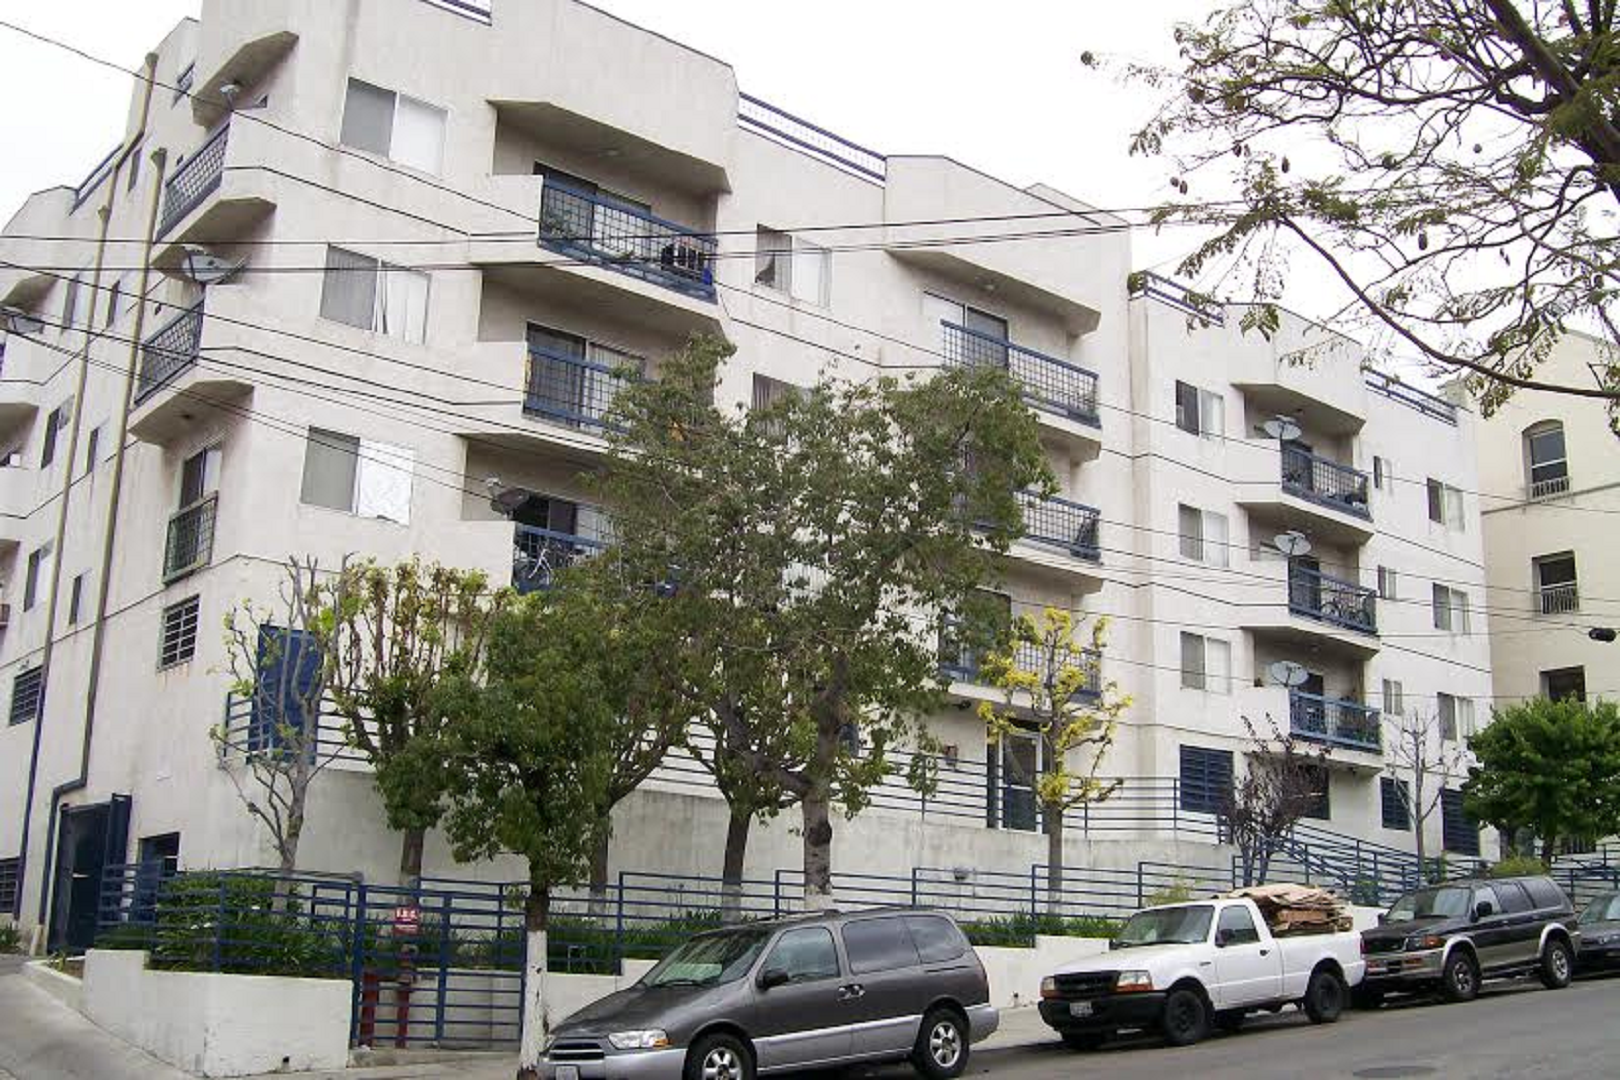 Three story building in white color with blue railings and windows